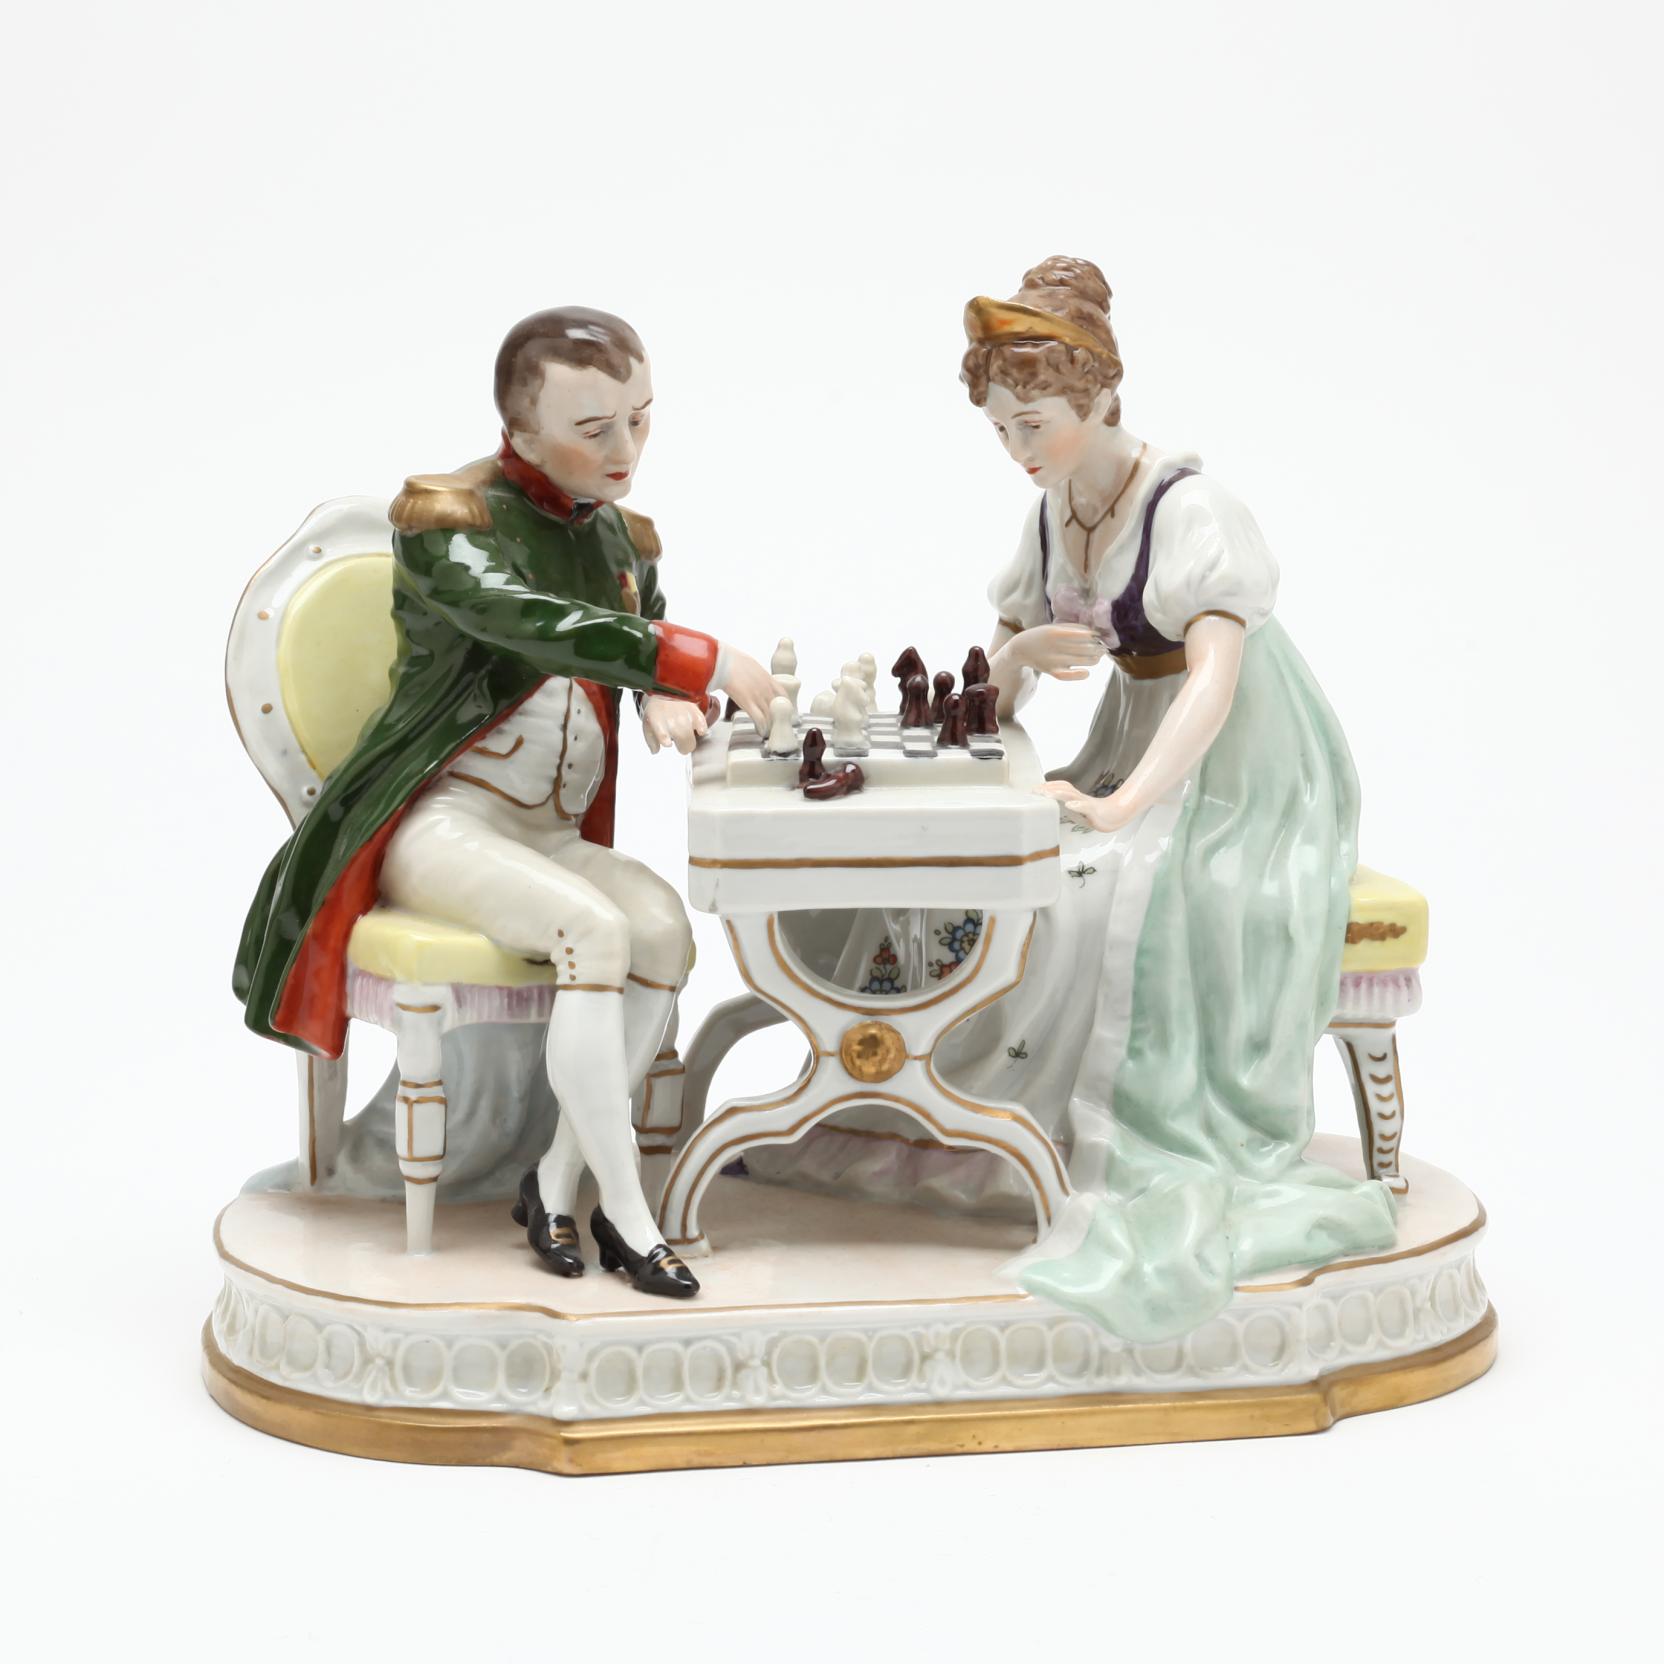 Scheibe Alsbach for Kister Porcelain Figural Group (Lot 66 - Collection  from Dr. & Mrs. Richard Epes AuctionDec 16, 2016, 1:00pm)